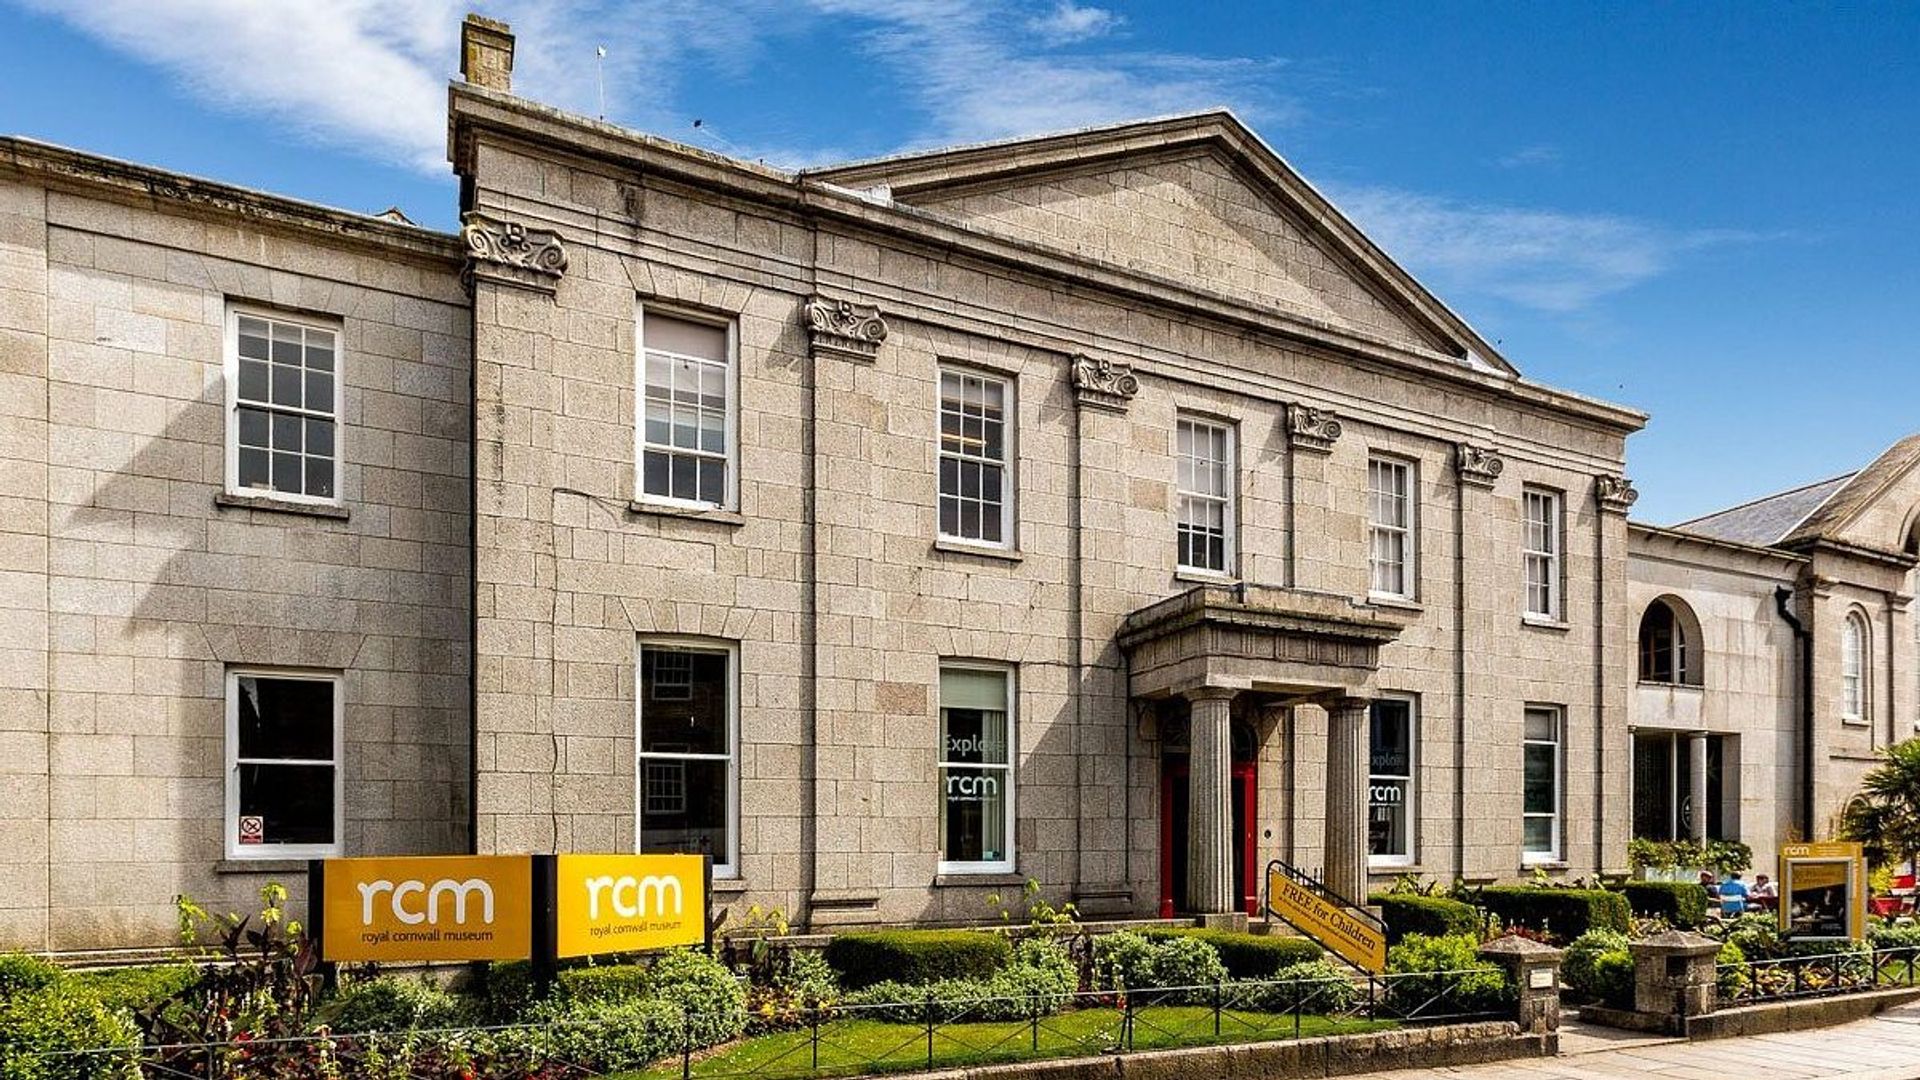 The Royal Cornwall Museum in Truro is one UK institution that is struggling to remain open amid funding cuts and a lack of state support Courtesy of the Royal Cornwall Museum